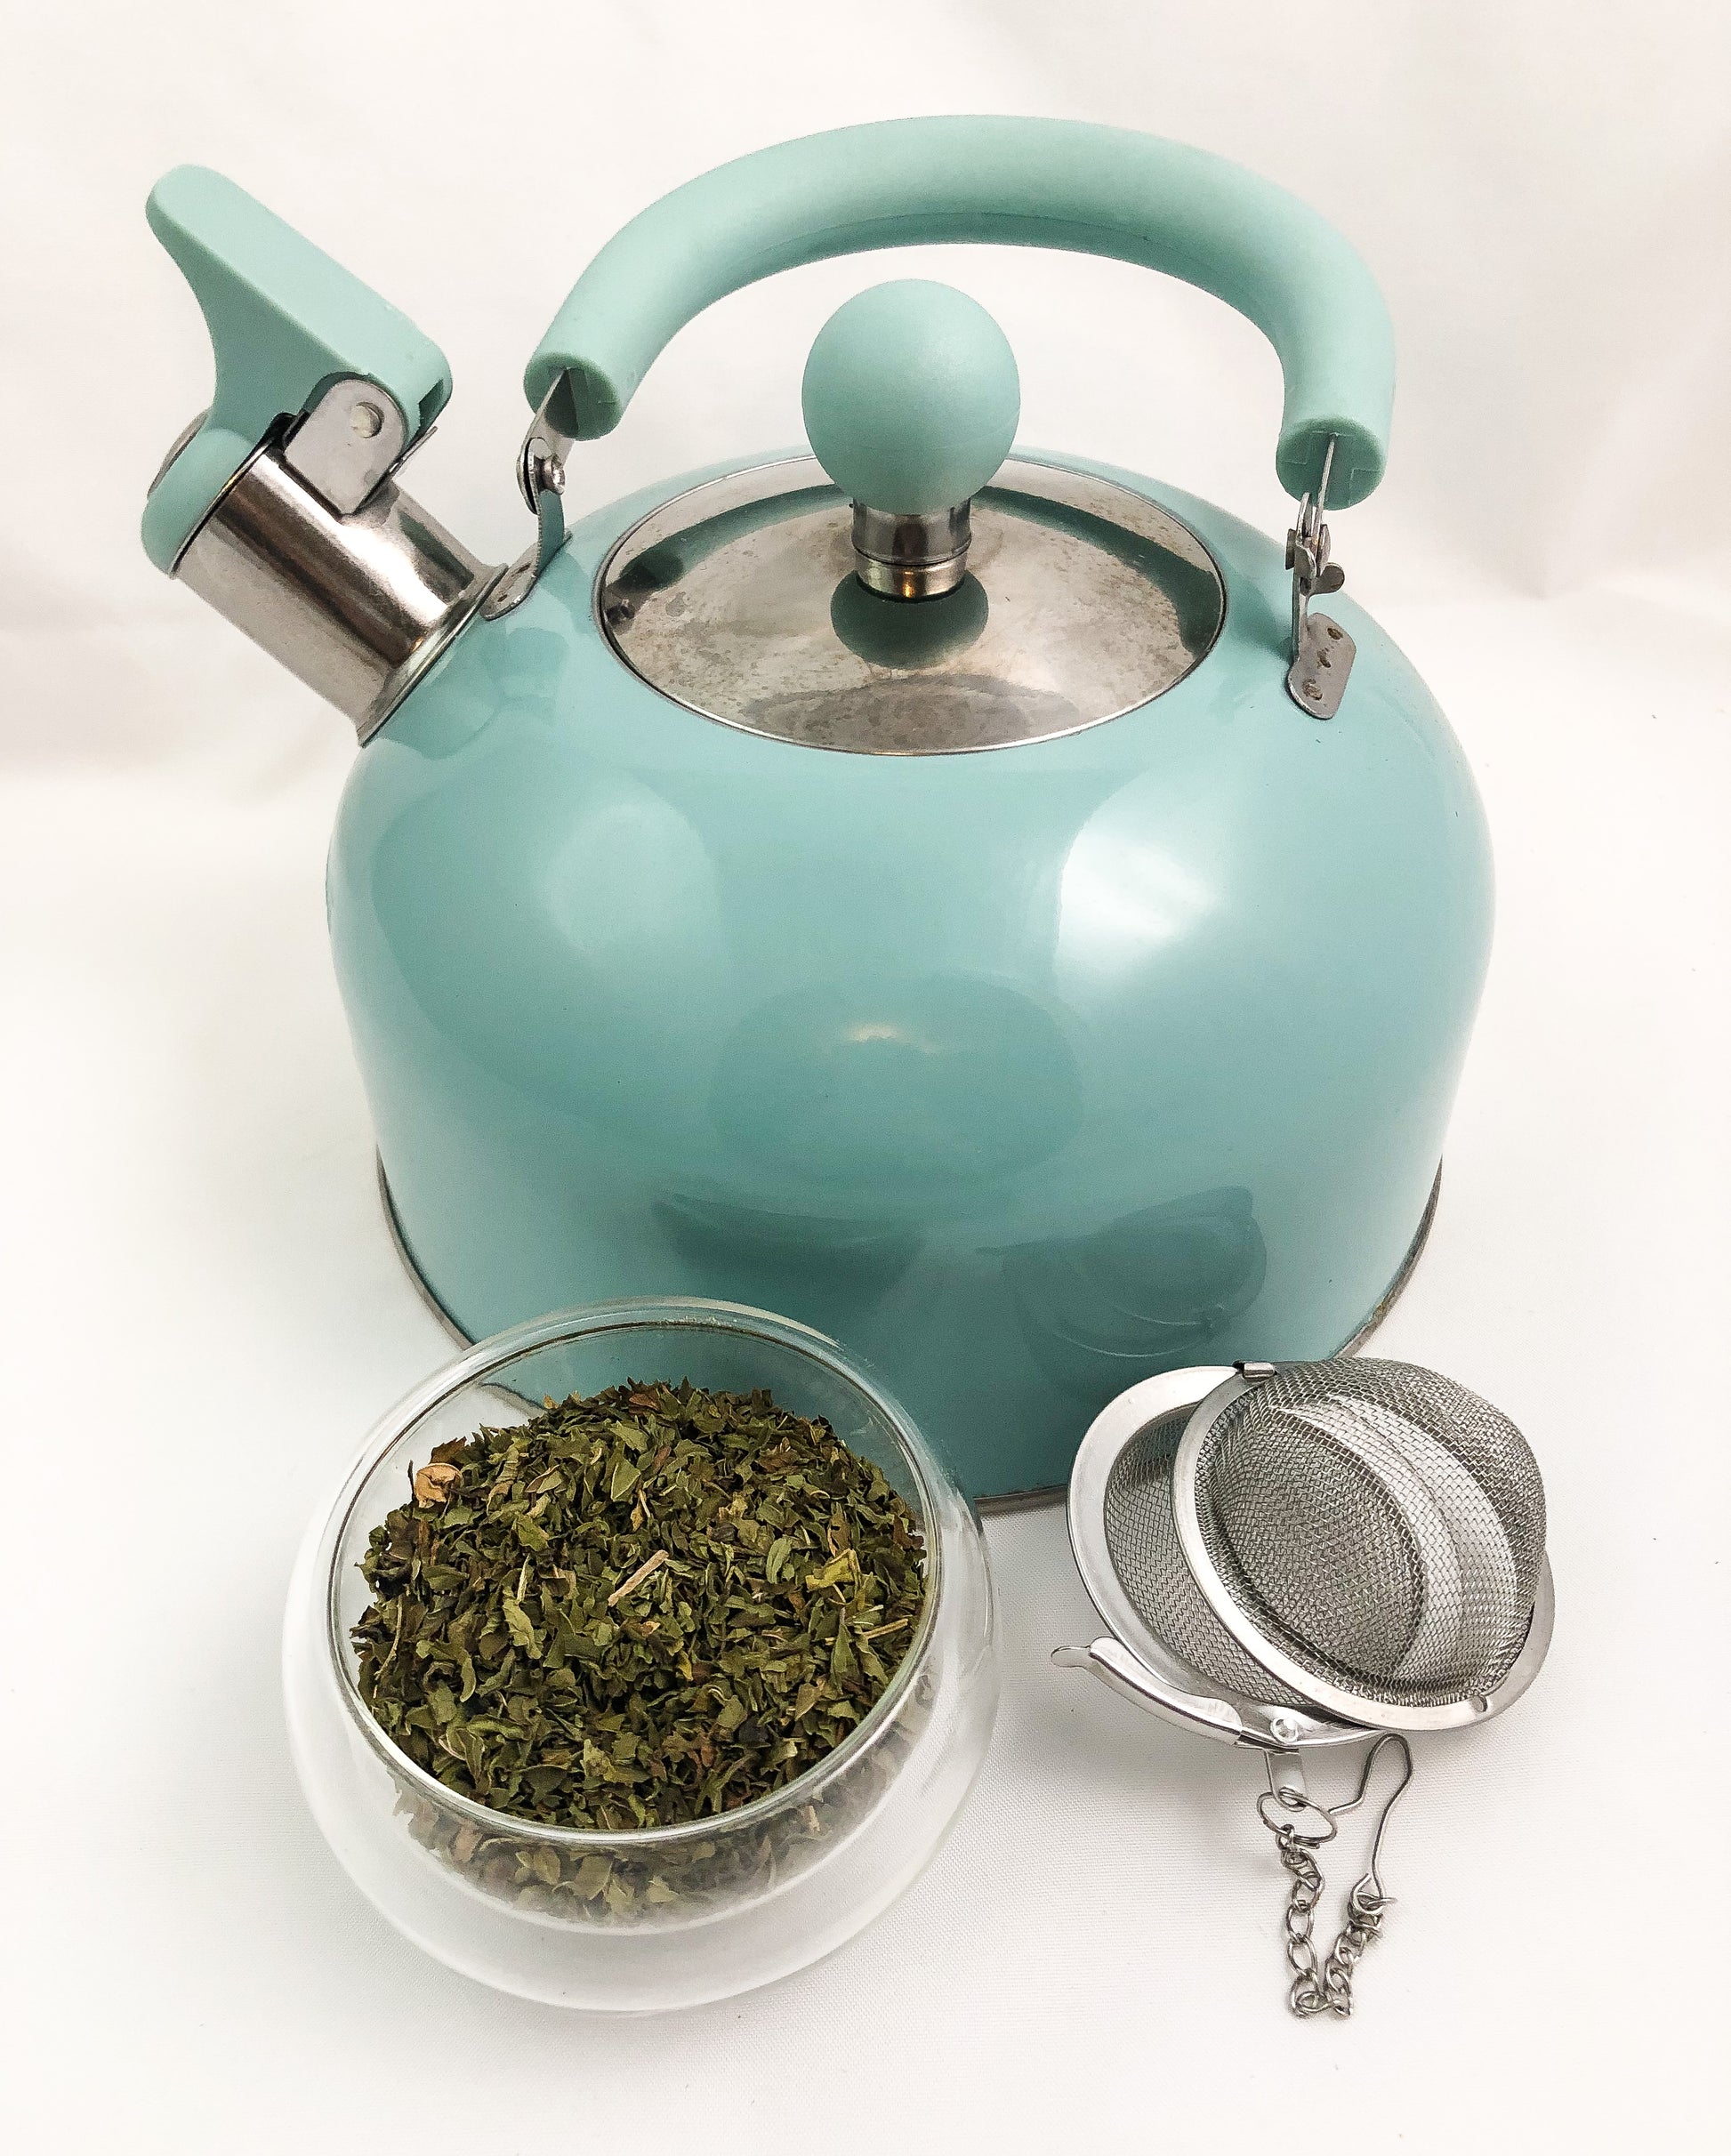 aqua colored teapot next to a small clear glass cup of dried peppermint leaves and a mesh tea infuser with white background